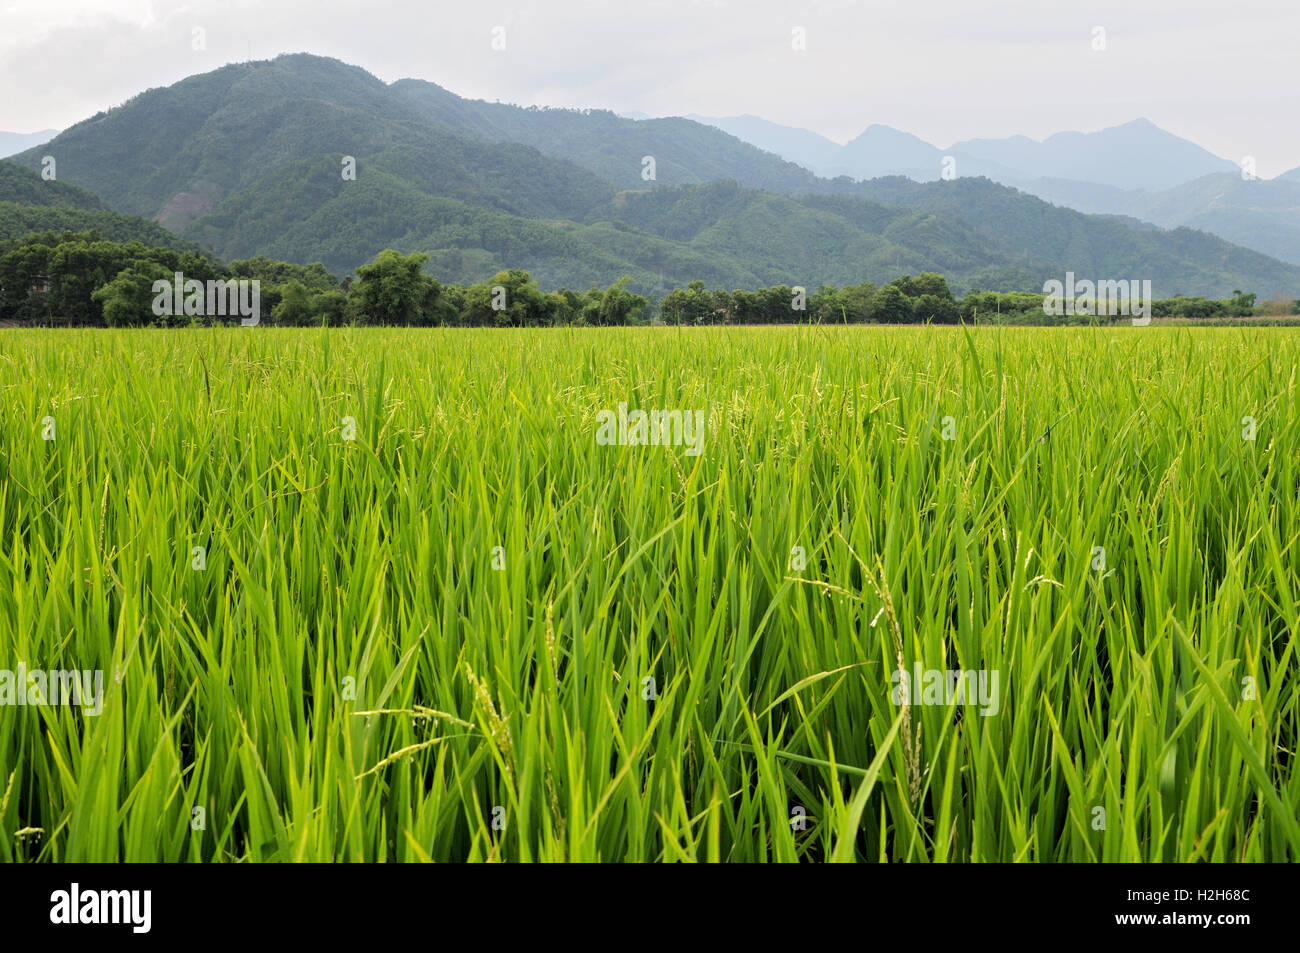 Mountains and rice paddy along the road from Hanoi to Ha Giang in North Vietnam Stock Photo